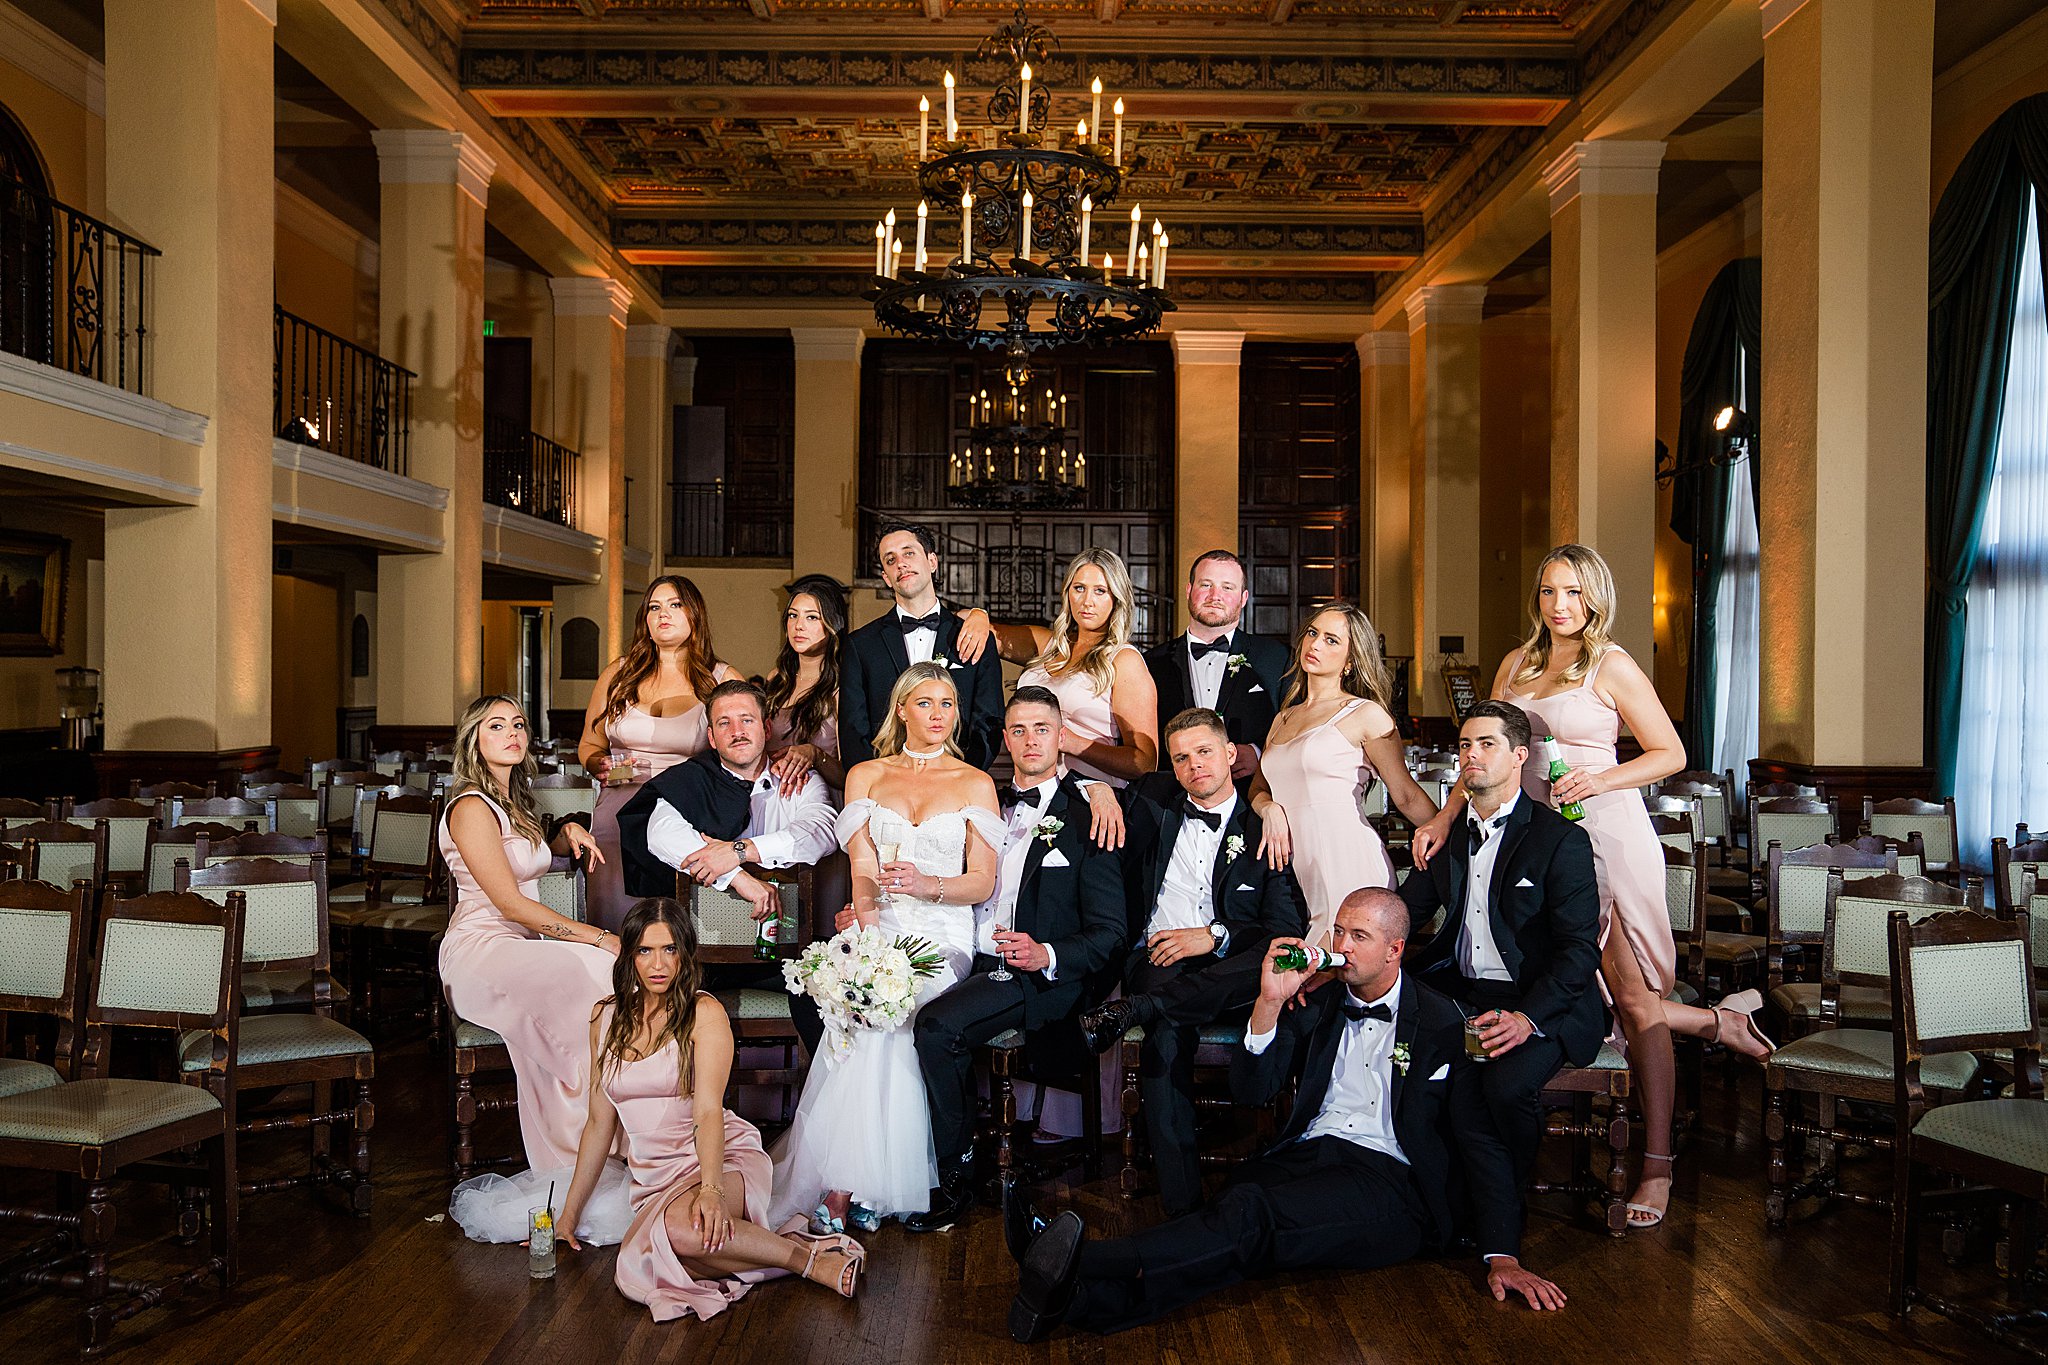 A large wedding party pose in a group at the the Wilshire Ebell of Los Angeles. They are posed like the promo photos from "Gossip Girl" and holding cocktails. The women are in light pink dresses and the men are in classic black suits. Photos by Kate Noelle Photography